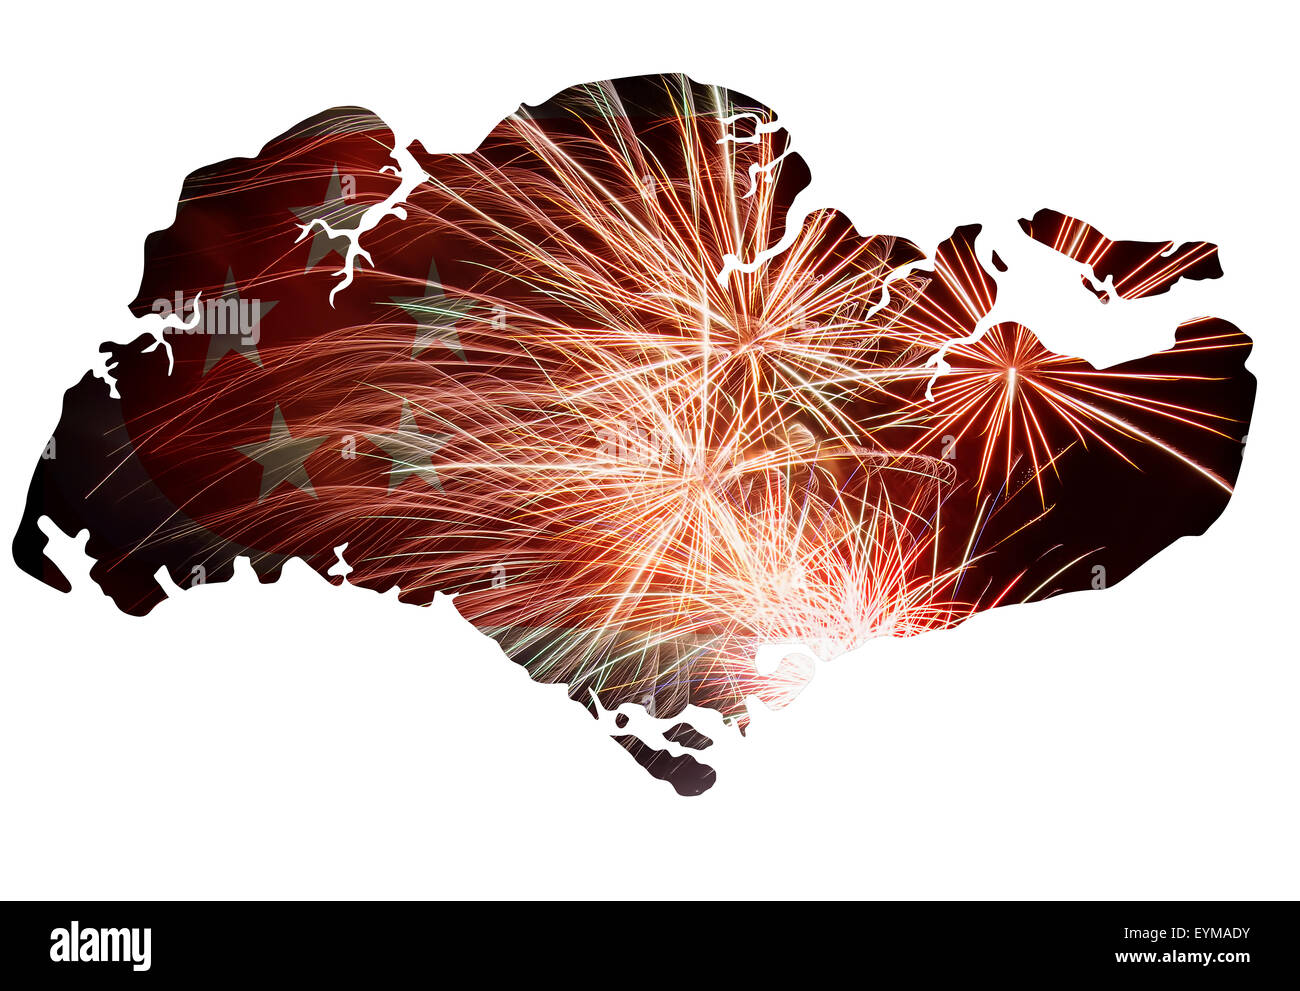 Republic of Singapore Flag with Fireworks Map Outline Silhouette for National Day Illustration Stock Photo